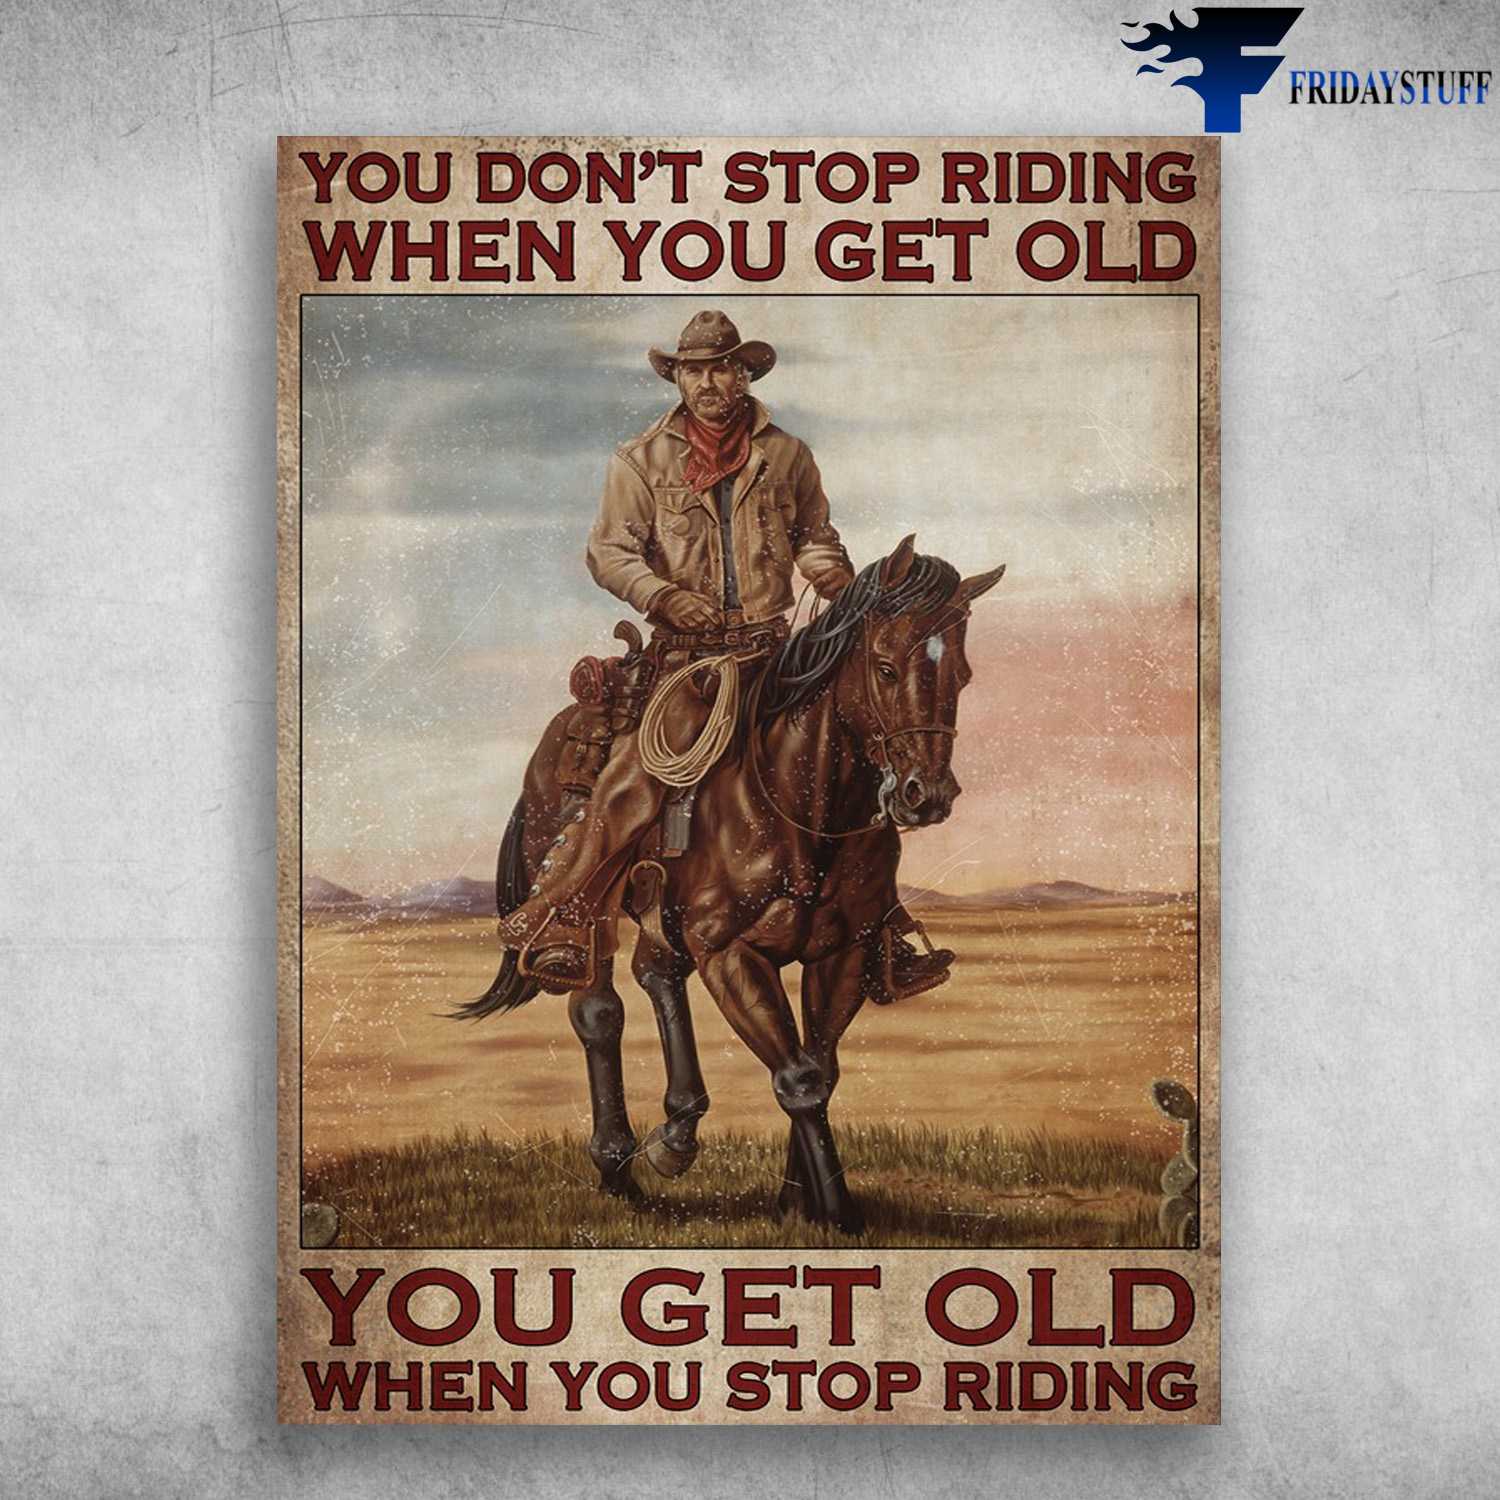 Old Cowboy, Horse Riding - You Don't Stop Riding When You Get Old, You Get Old When You Stop Riding